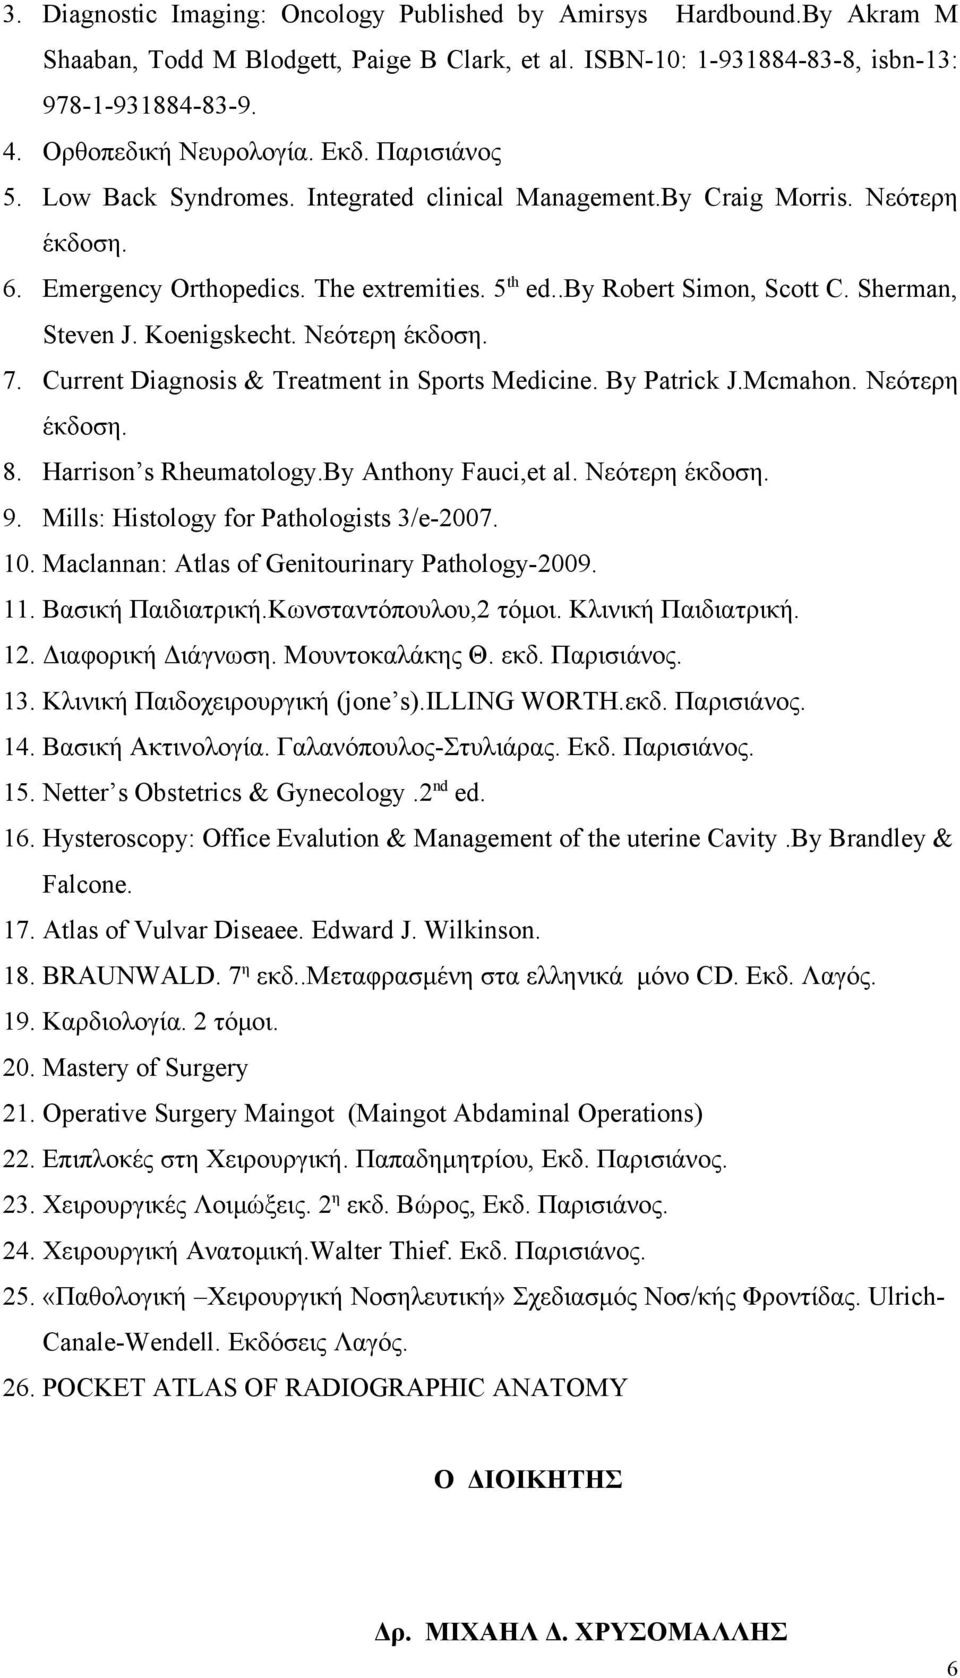 Koenigskecht. Νεότερη έκδοση. 7. Current Diagnosis & Treatment in Sports Medicine. By Patrick J.Mcmahon. Νεότερη έκδοση. 8. Harrison s Rheumatology.By Anthony Fauci,et al. Νεότερη έκδοση. 9.